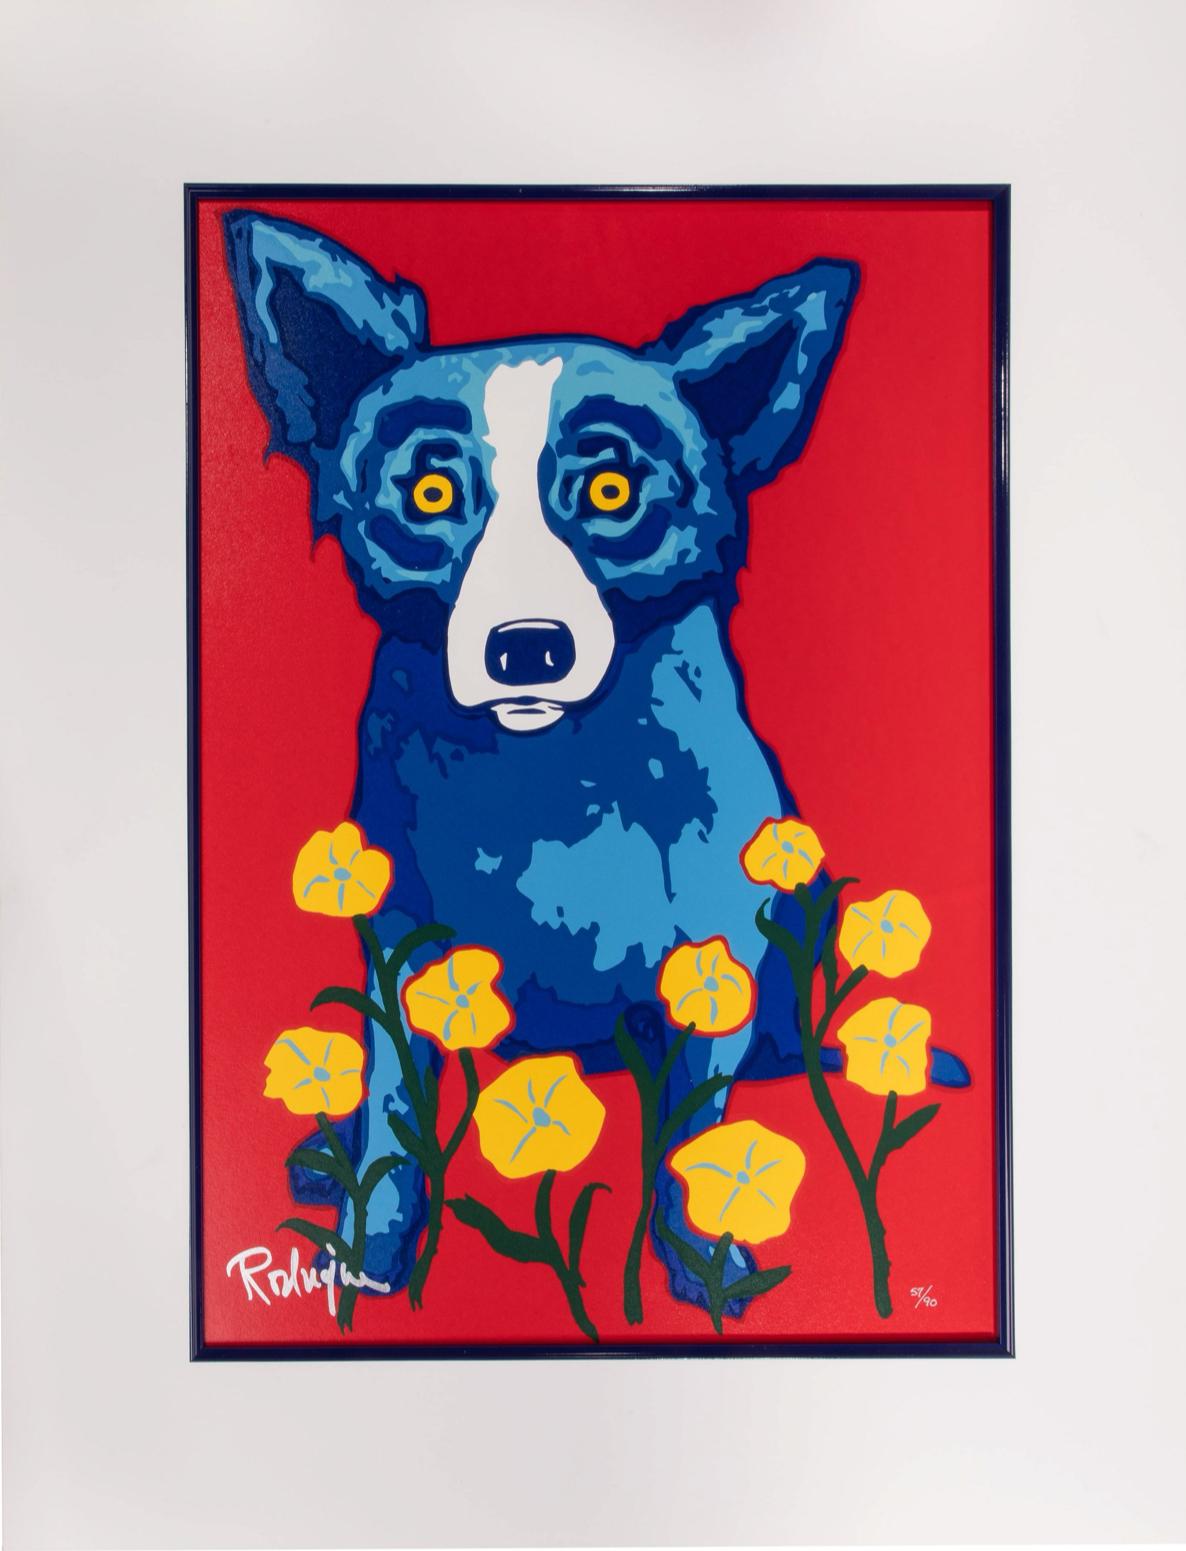 See How My Garden Grows - Pop Art Print by George Rodrigue